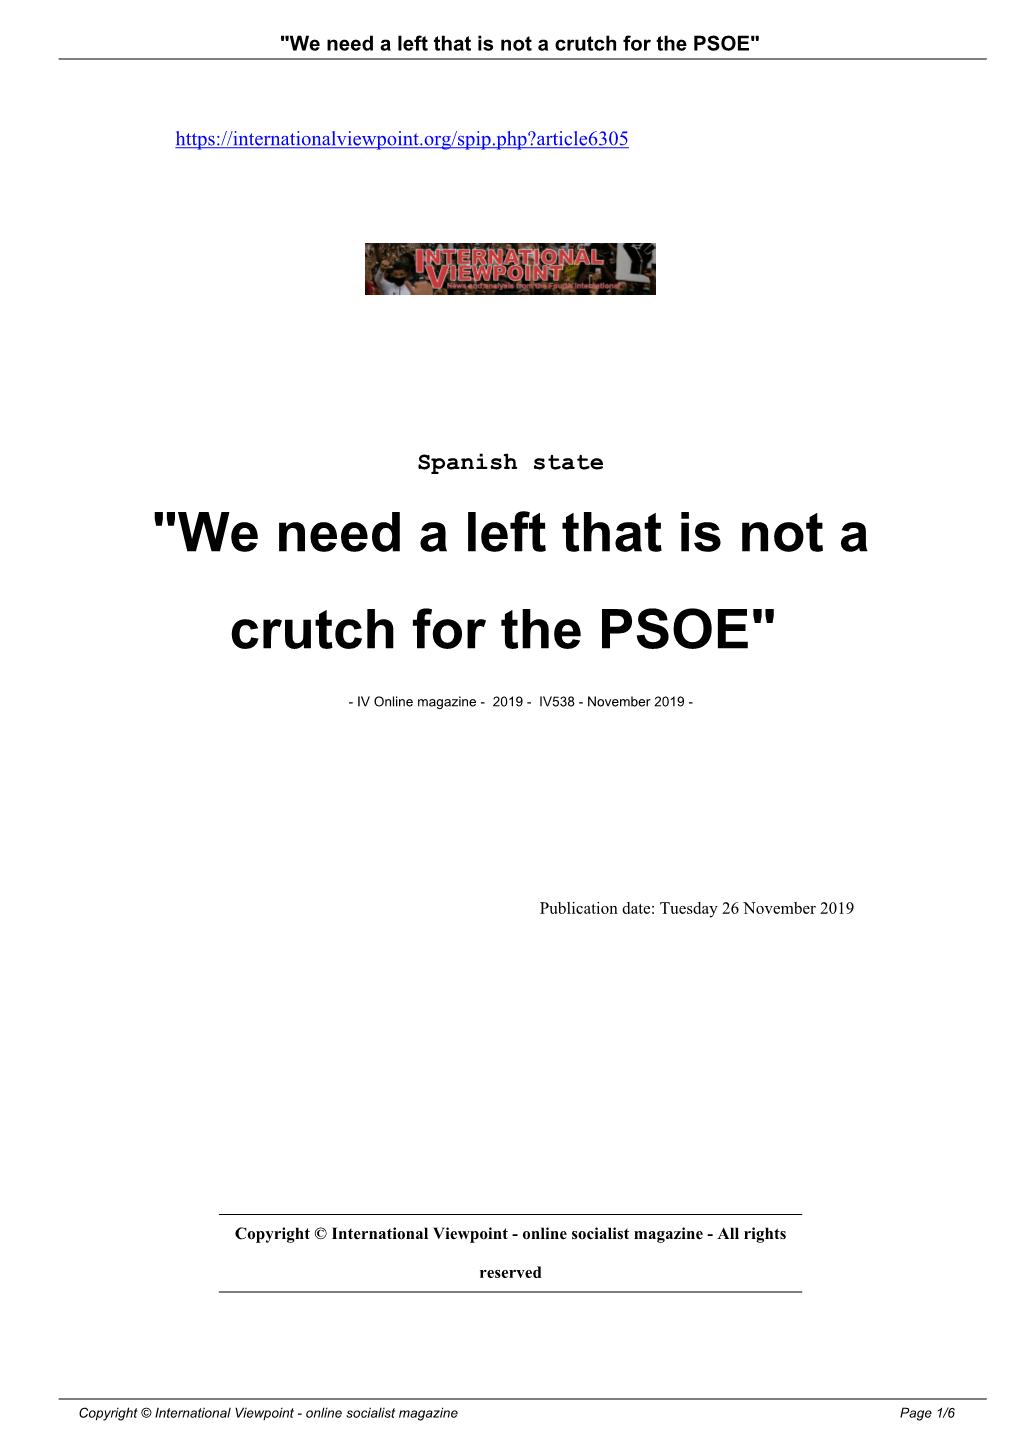 "We Need a Left That Is Not a Crutch for the PSOE"